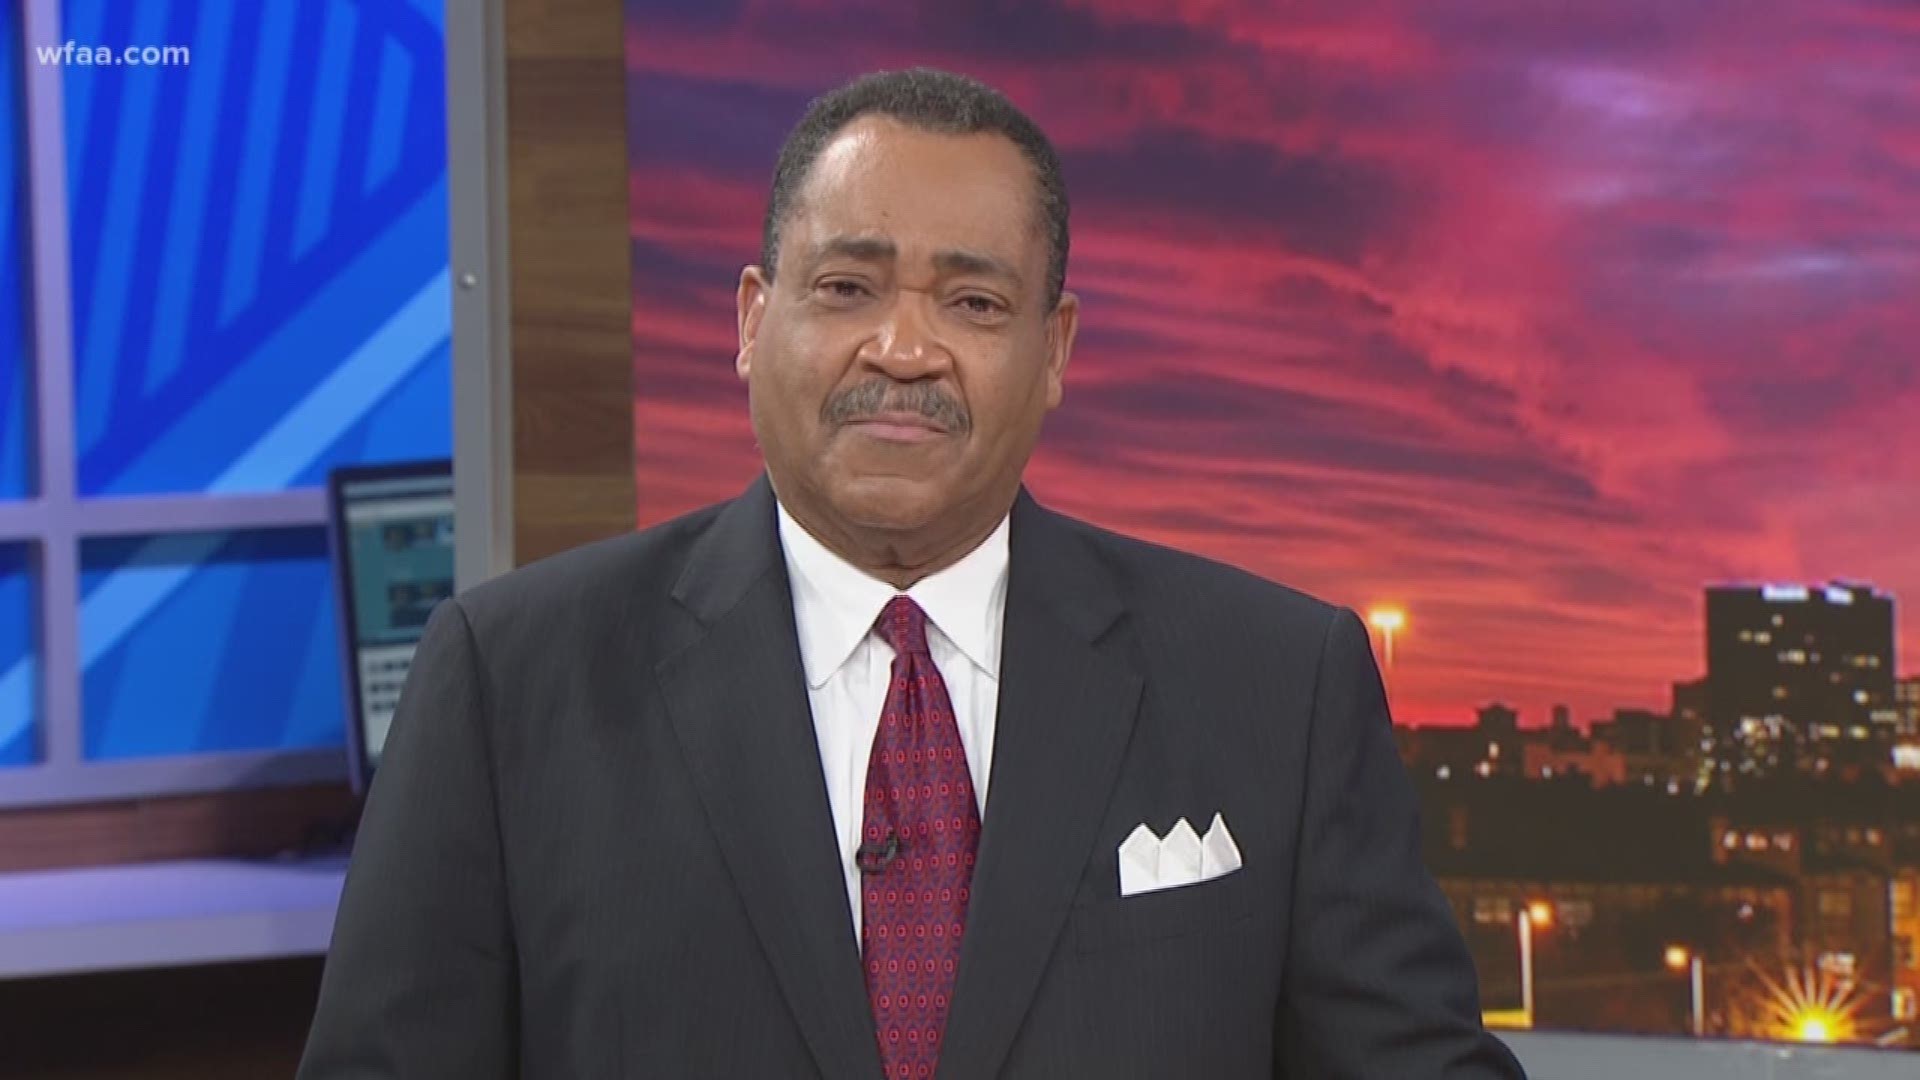 Oh his last day anchoring WFAA's 10 p.m. broadcast, John McCaa gives his final thoughts.